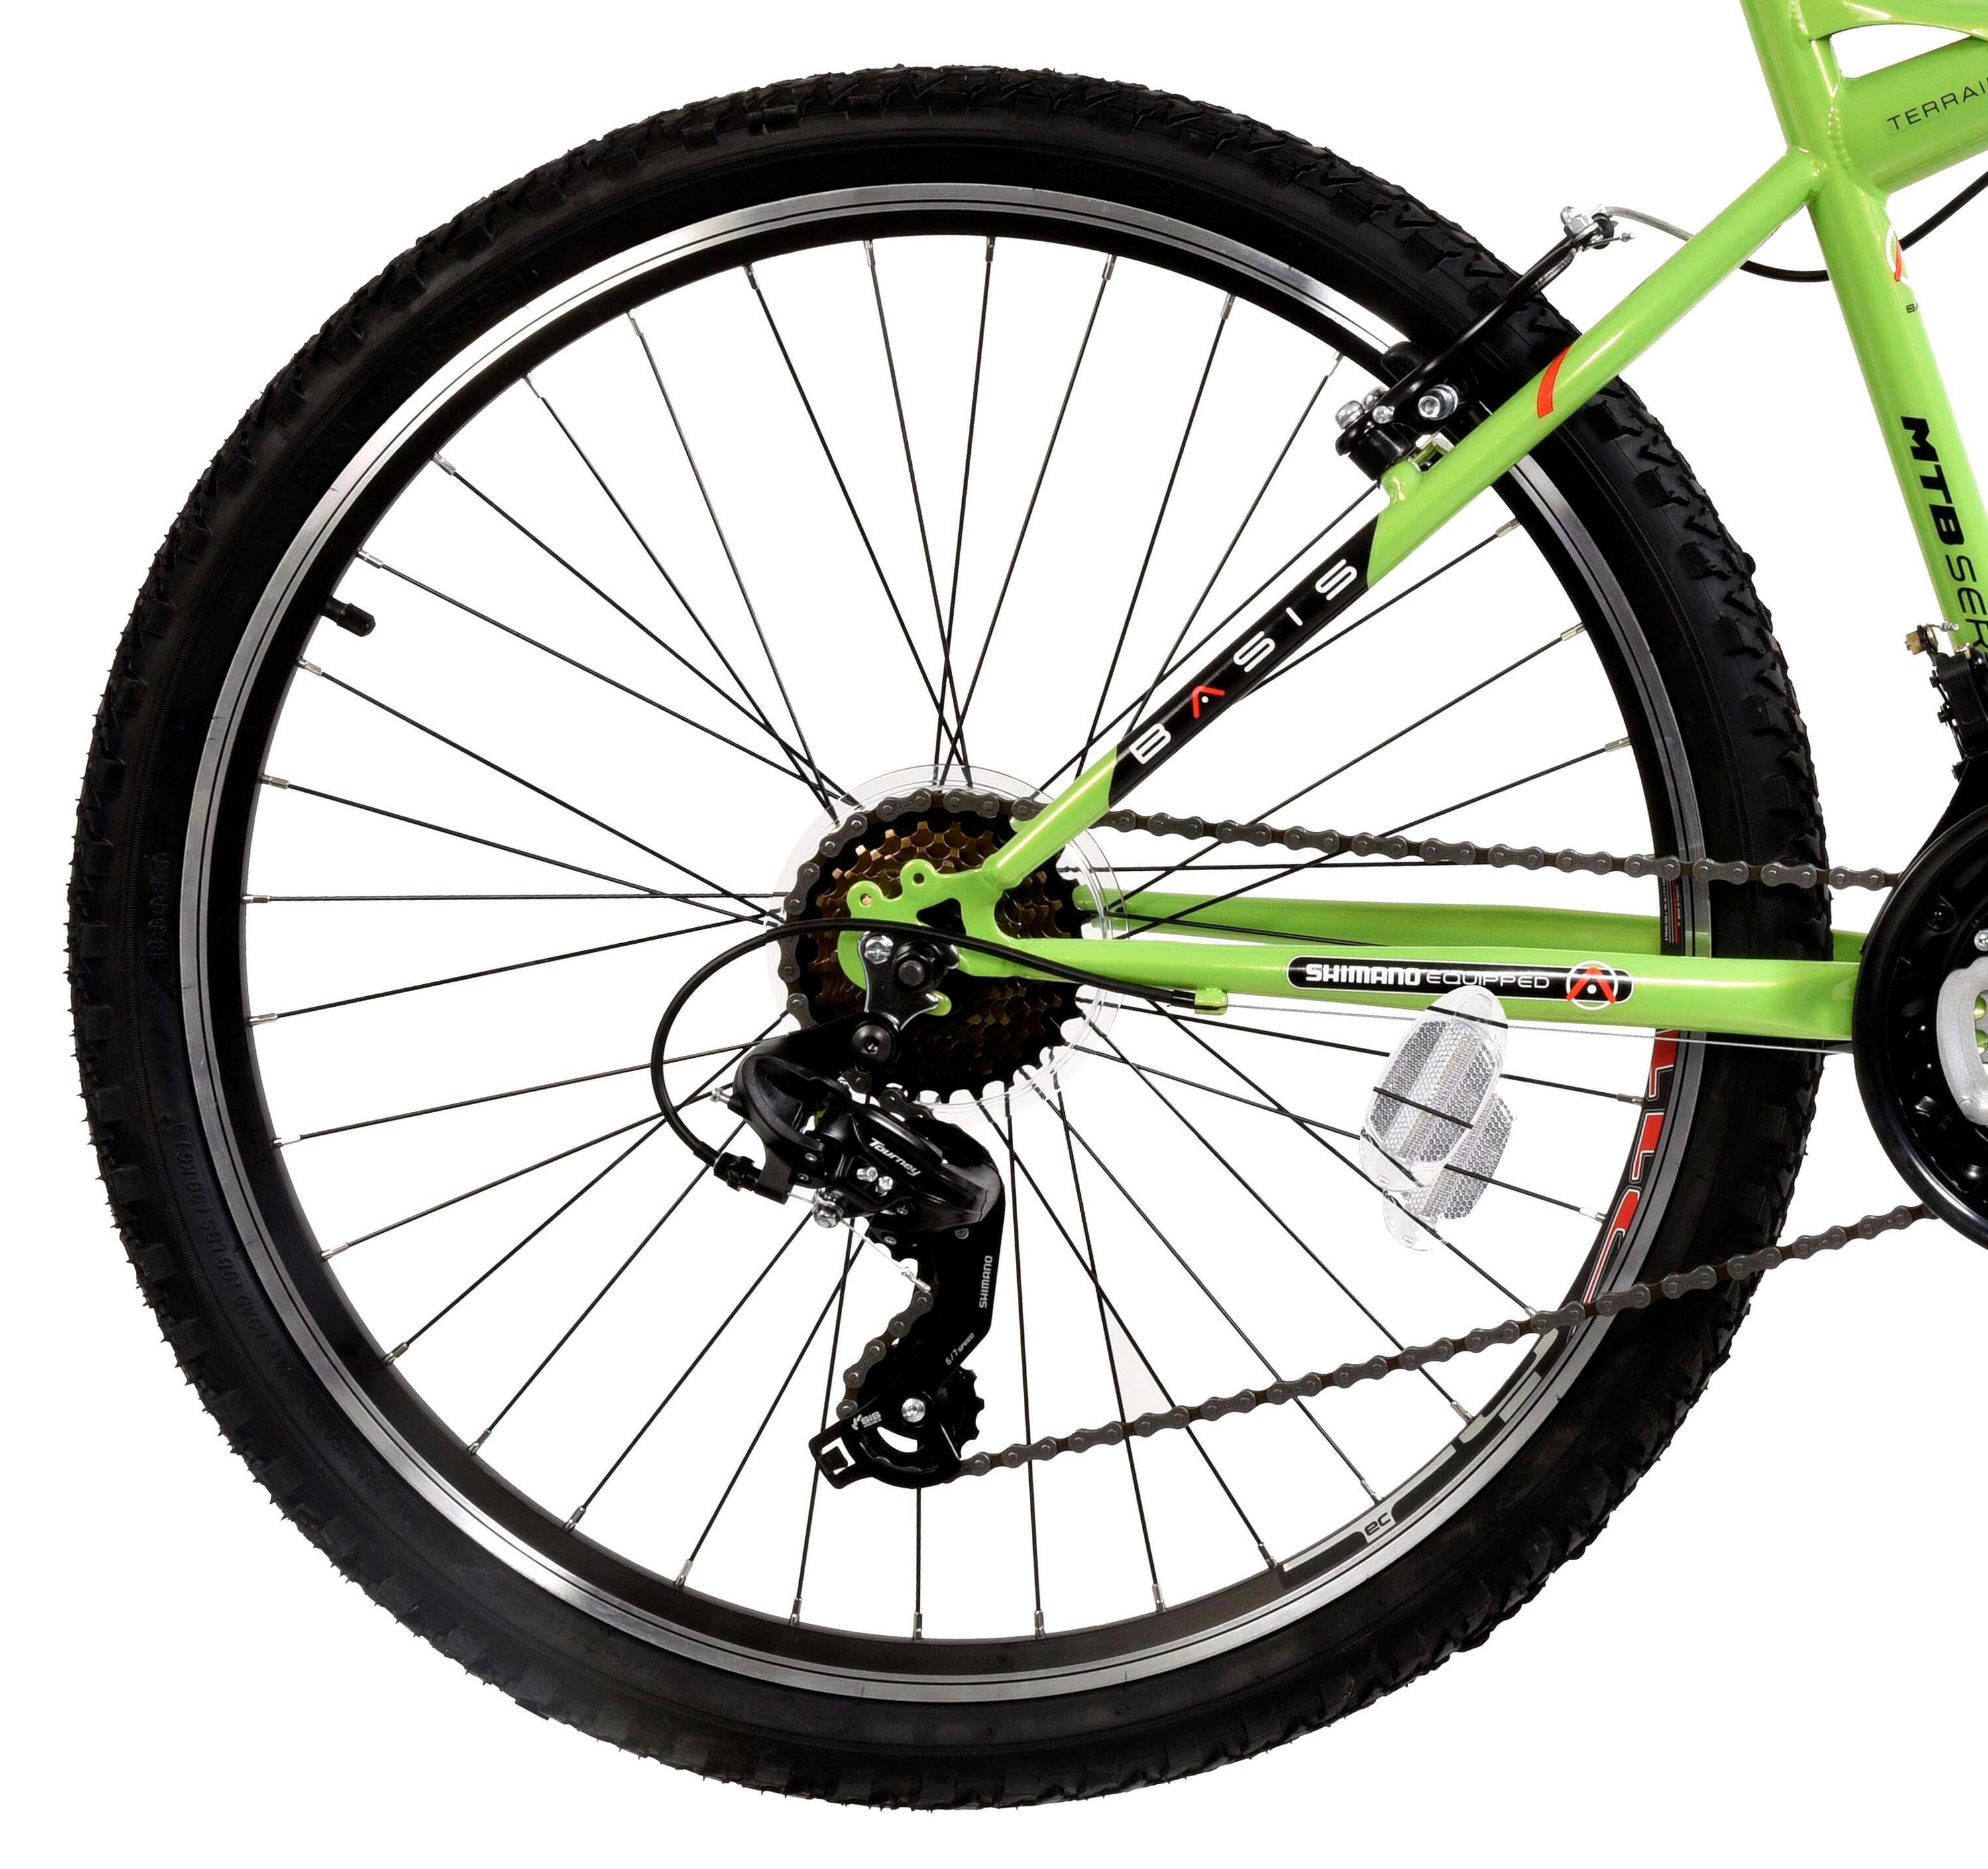 Basis Connect Adult's Hardtail Mountain Bike, 26In Wheel - Green/Black 5/5